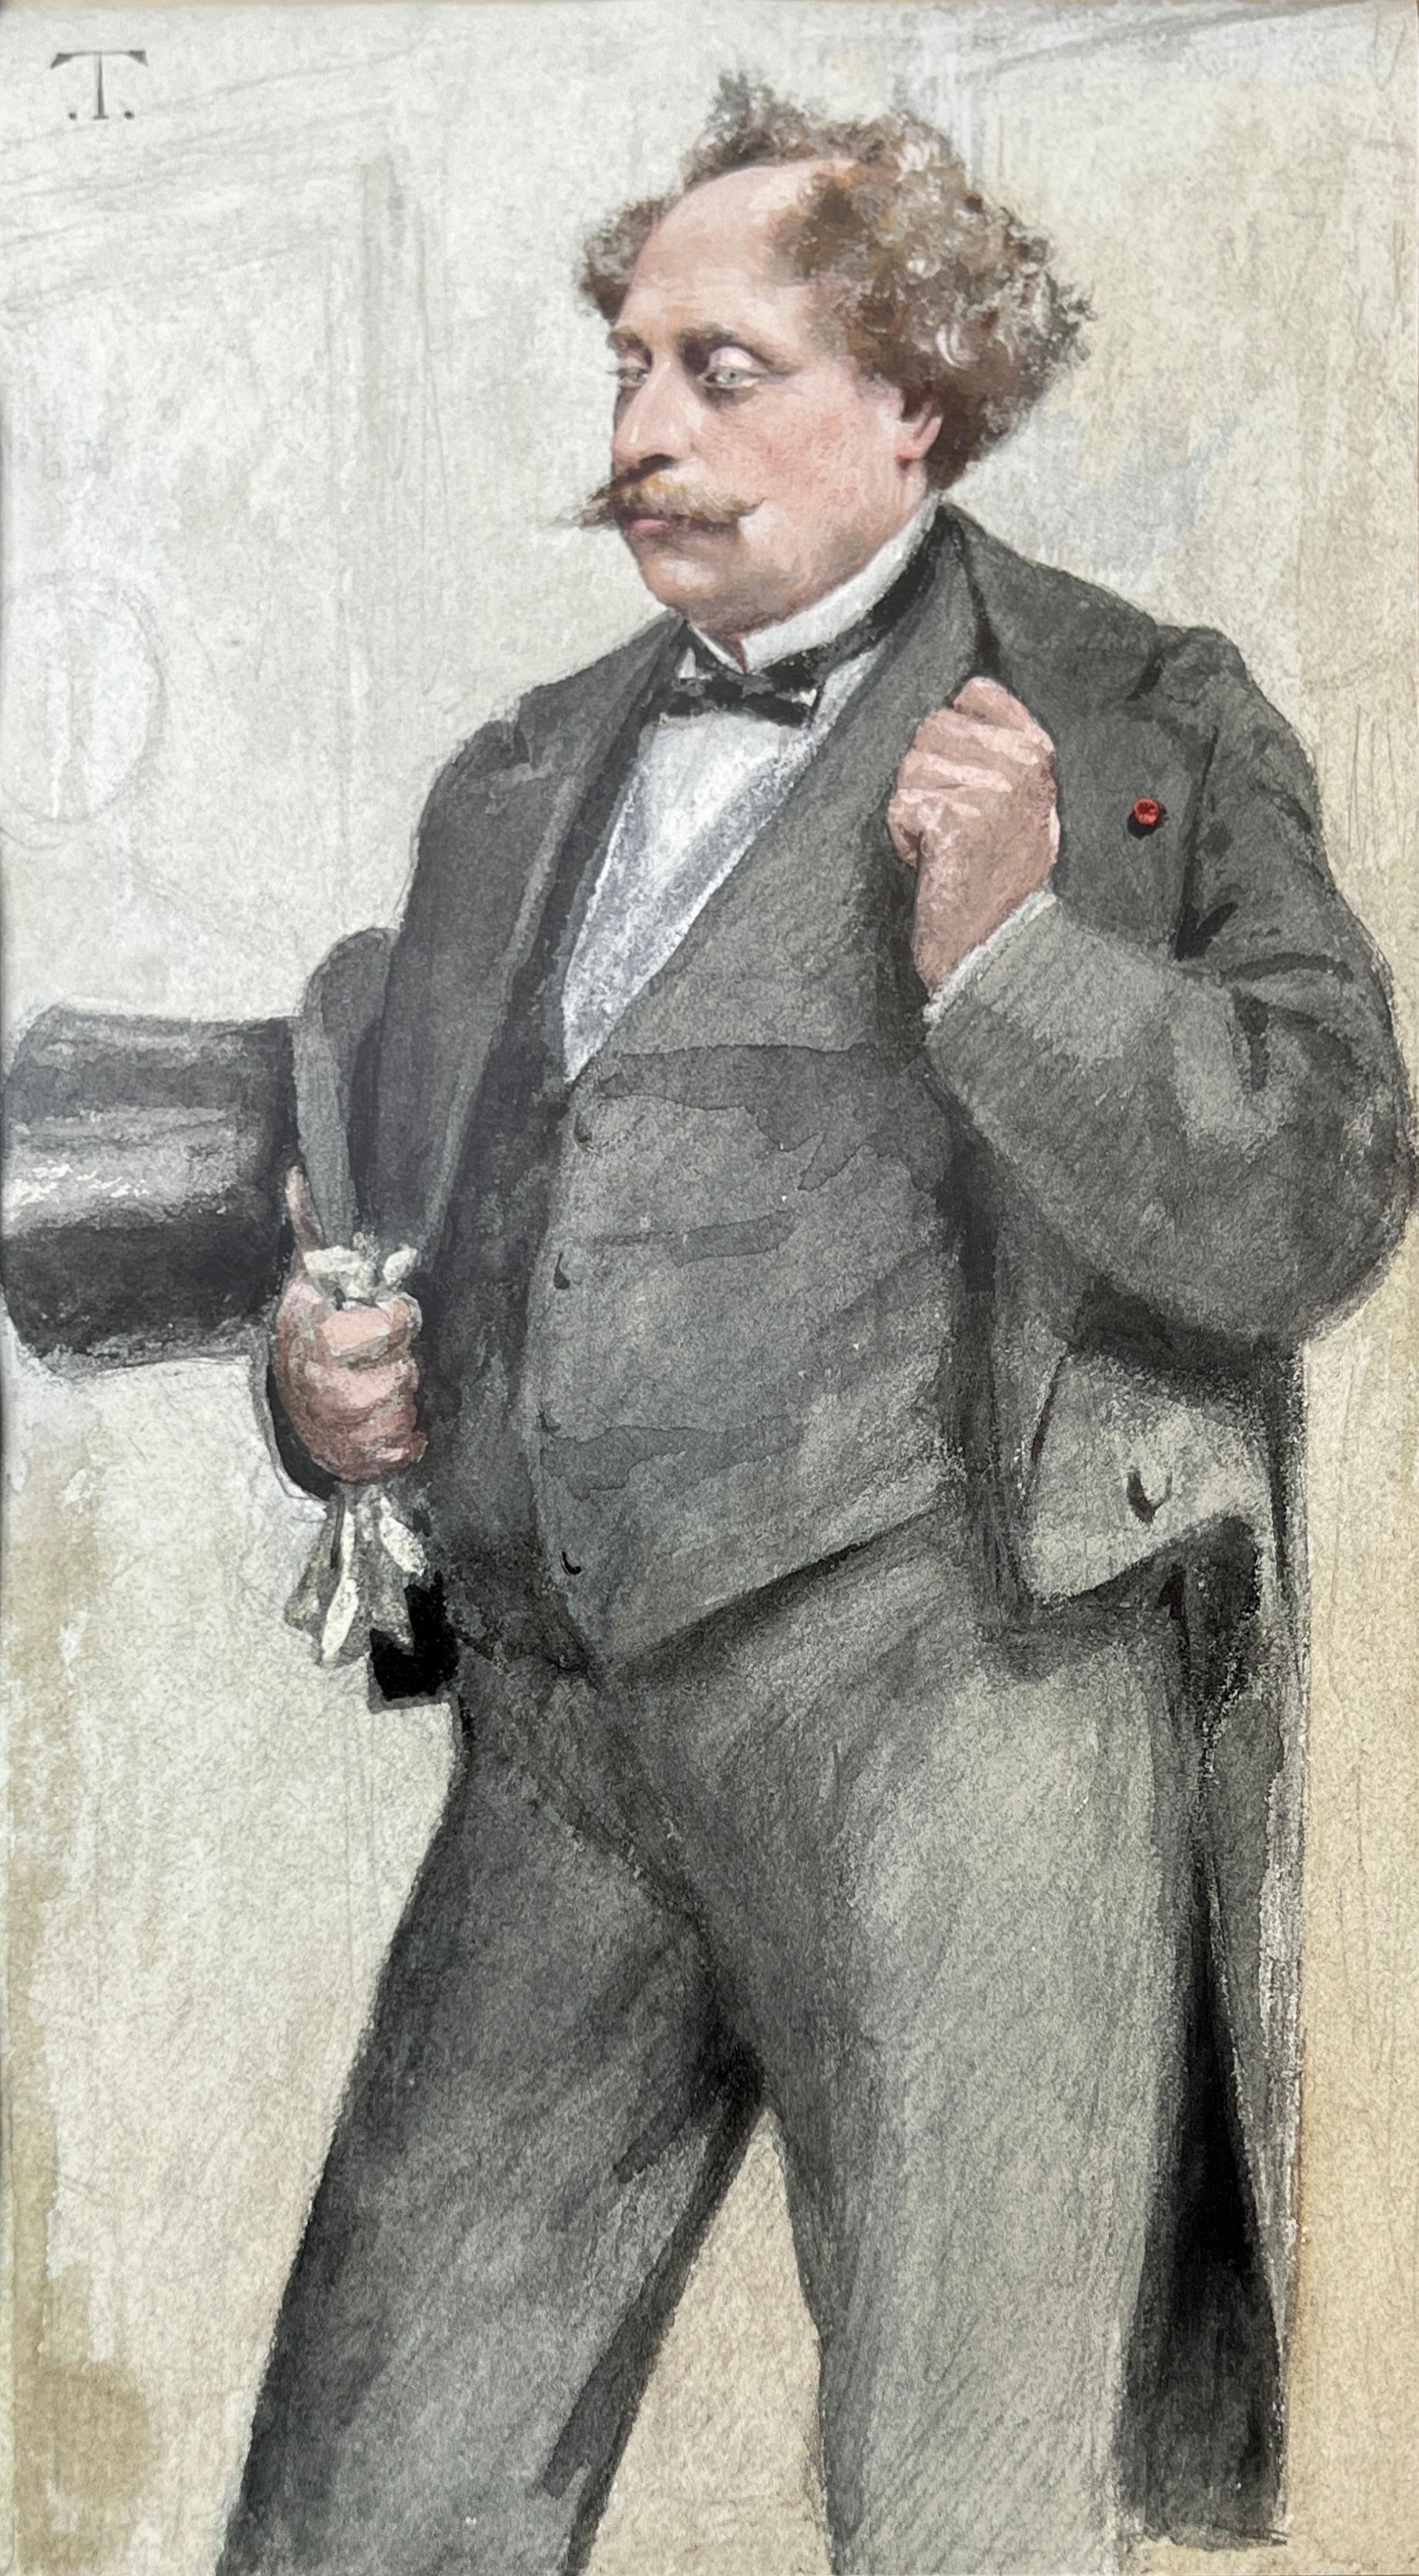 Our portrait of Alexandre Dumas fils (1824-1895) in pencil and watercolour heightened with white by Theobald Chartran (1849-1907) is the original artwork featured in the December 27, 1879 edition of Vanity Fair. Mounted here under an old decorative